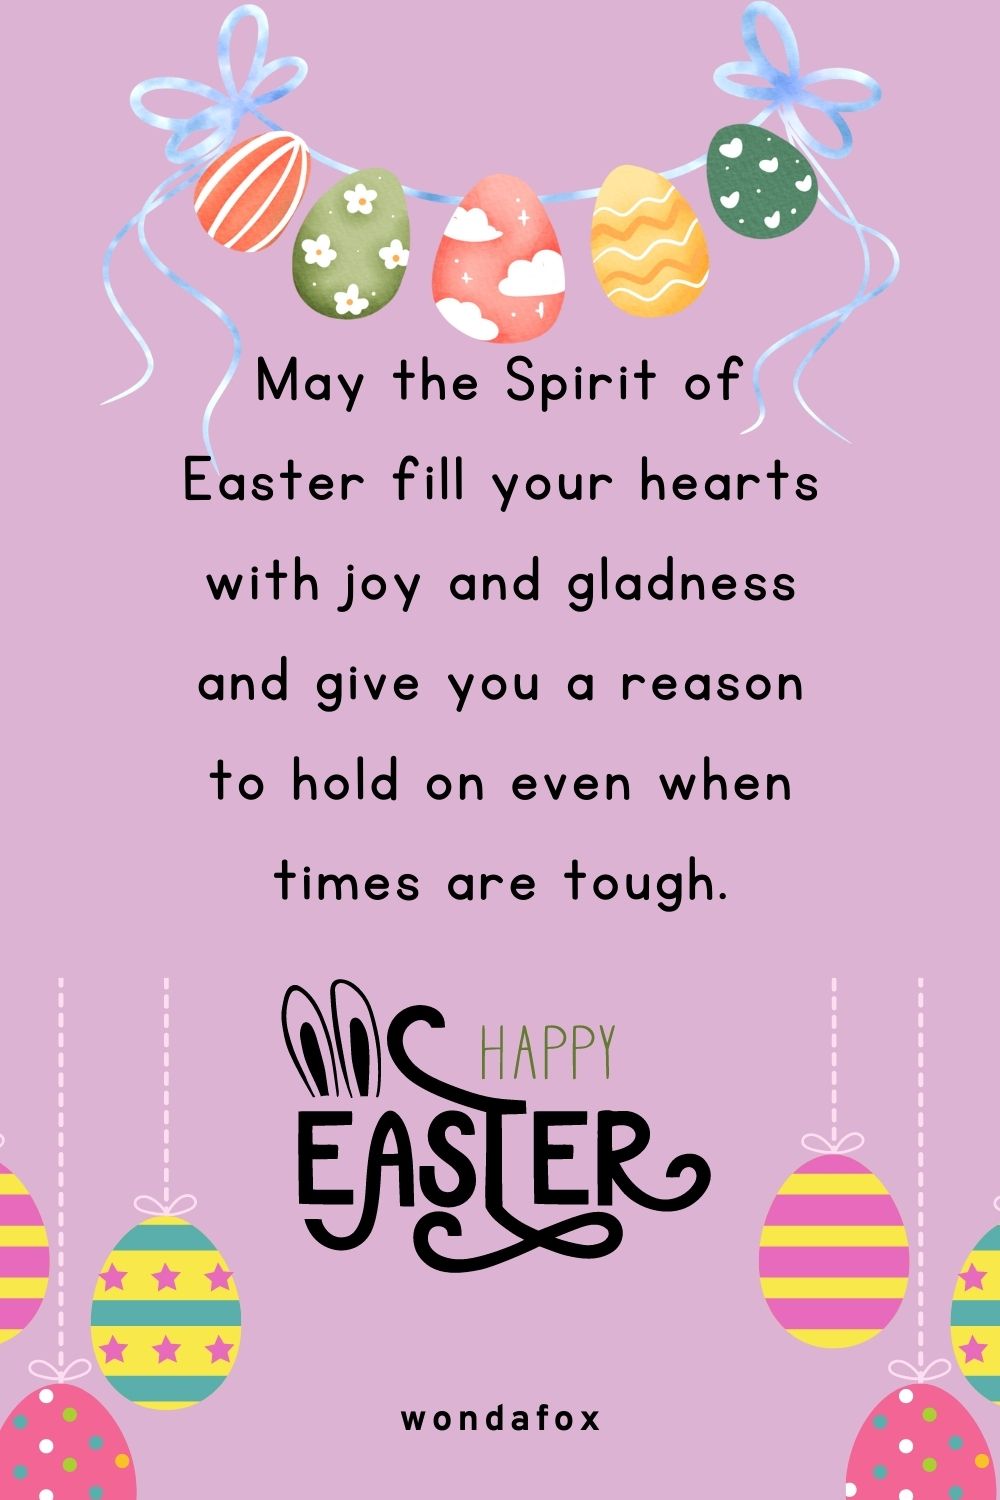 May the Spirit of Easter fill your hearts with joy and gladness and give you a reason to hold on even when times are tough. Happy Easter.